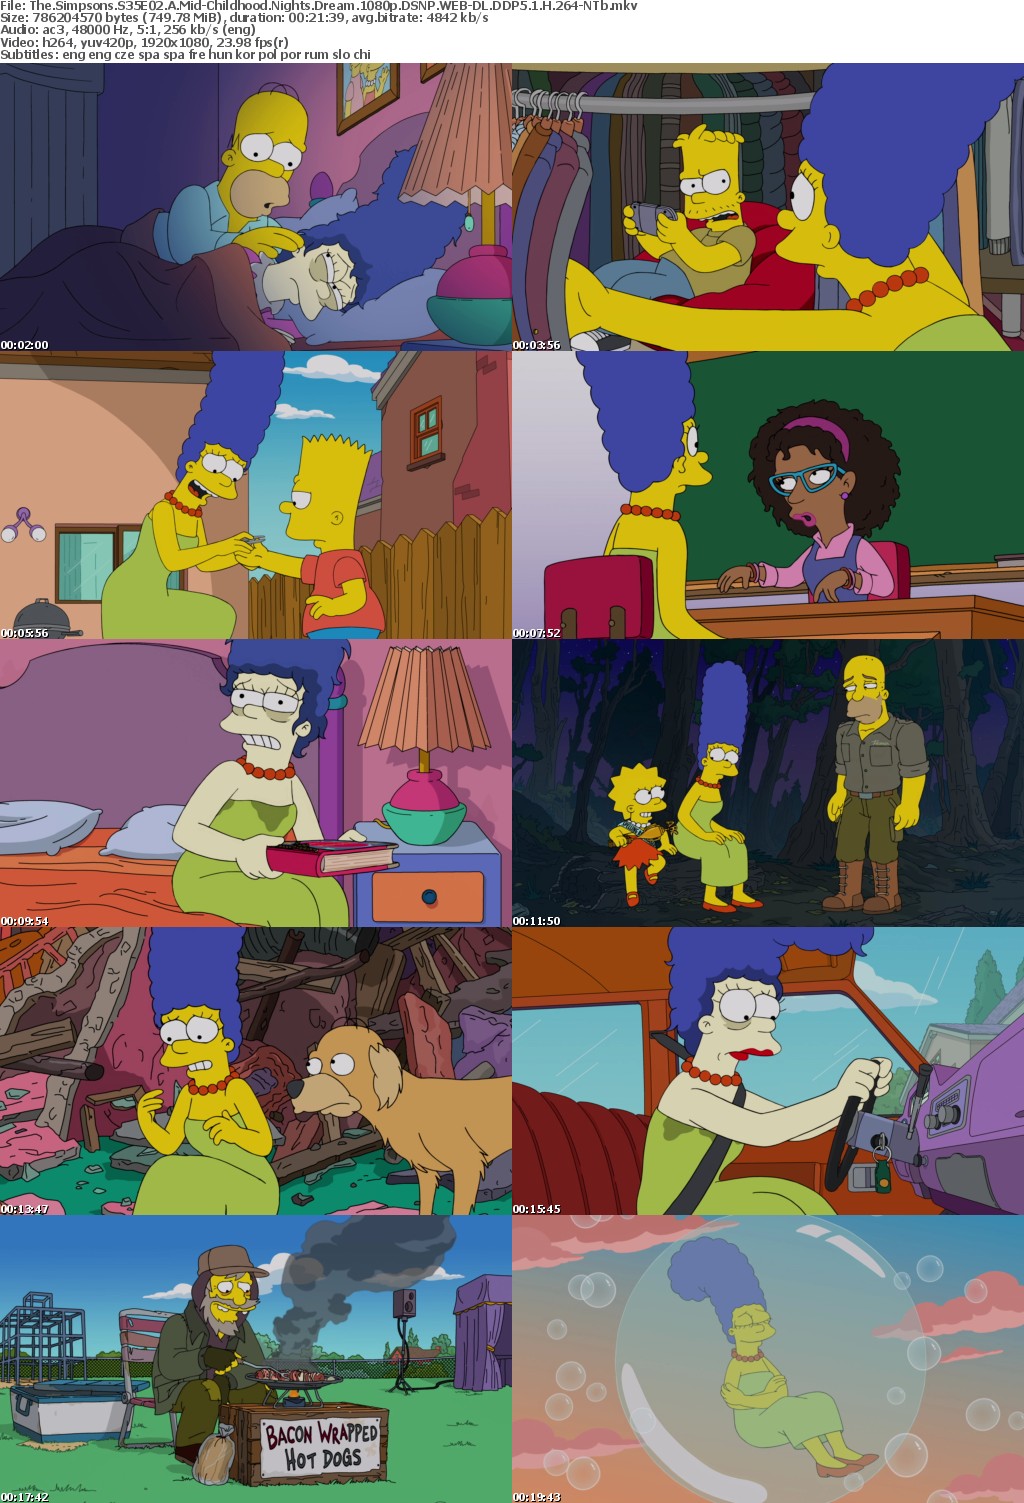 The Simpsons S35E02 A Mid-Childhood Nights Dream 1080p DSNP WEB-DL DDP5 1 H 264-NTb